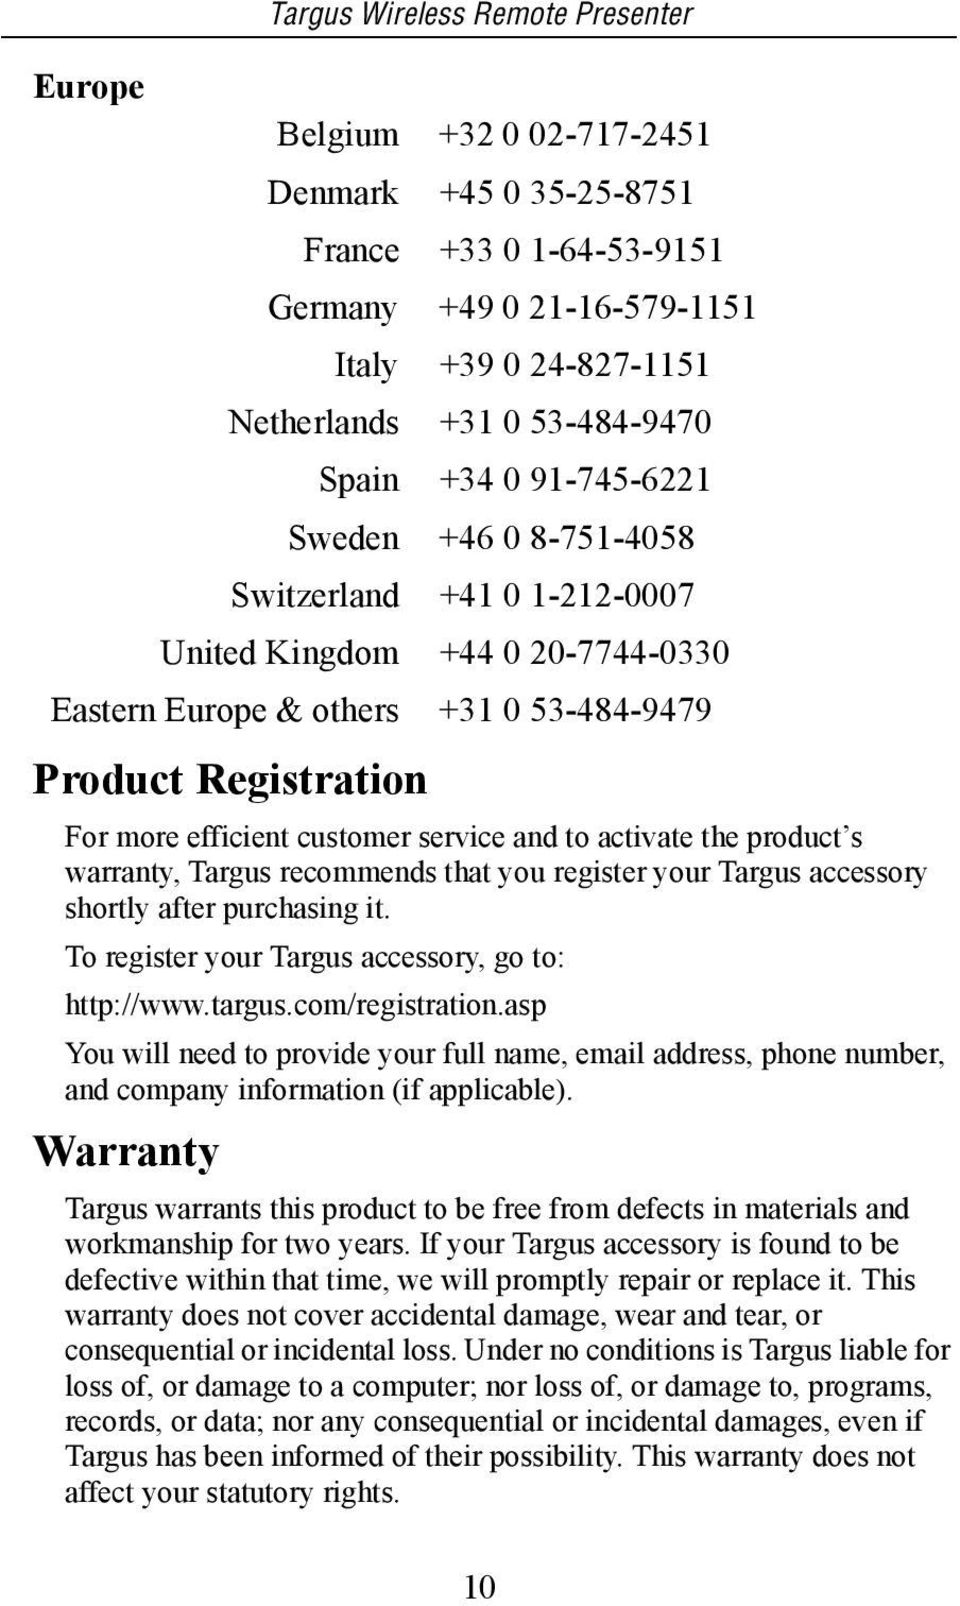 customer service and to activate the product s warranty, Targus recommends that you register your Targus accessory shortly after purchasing it. To register your Targus accessory, go to: http://www.